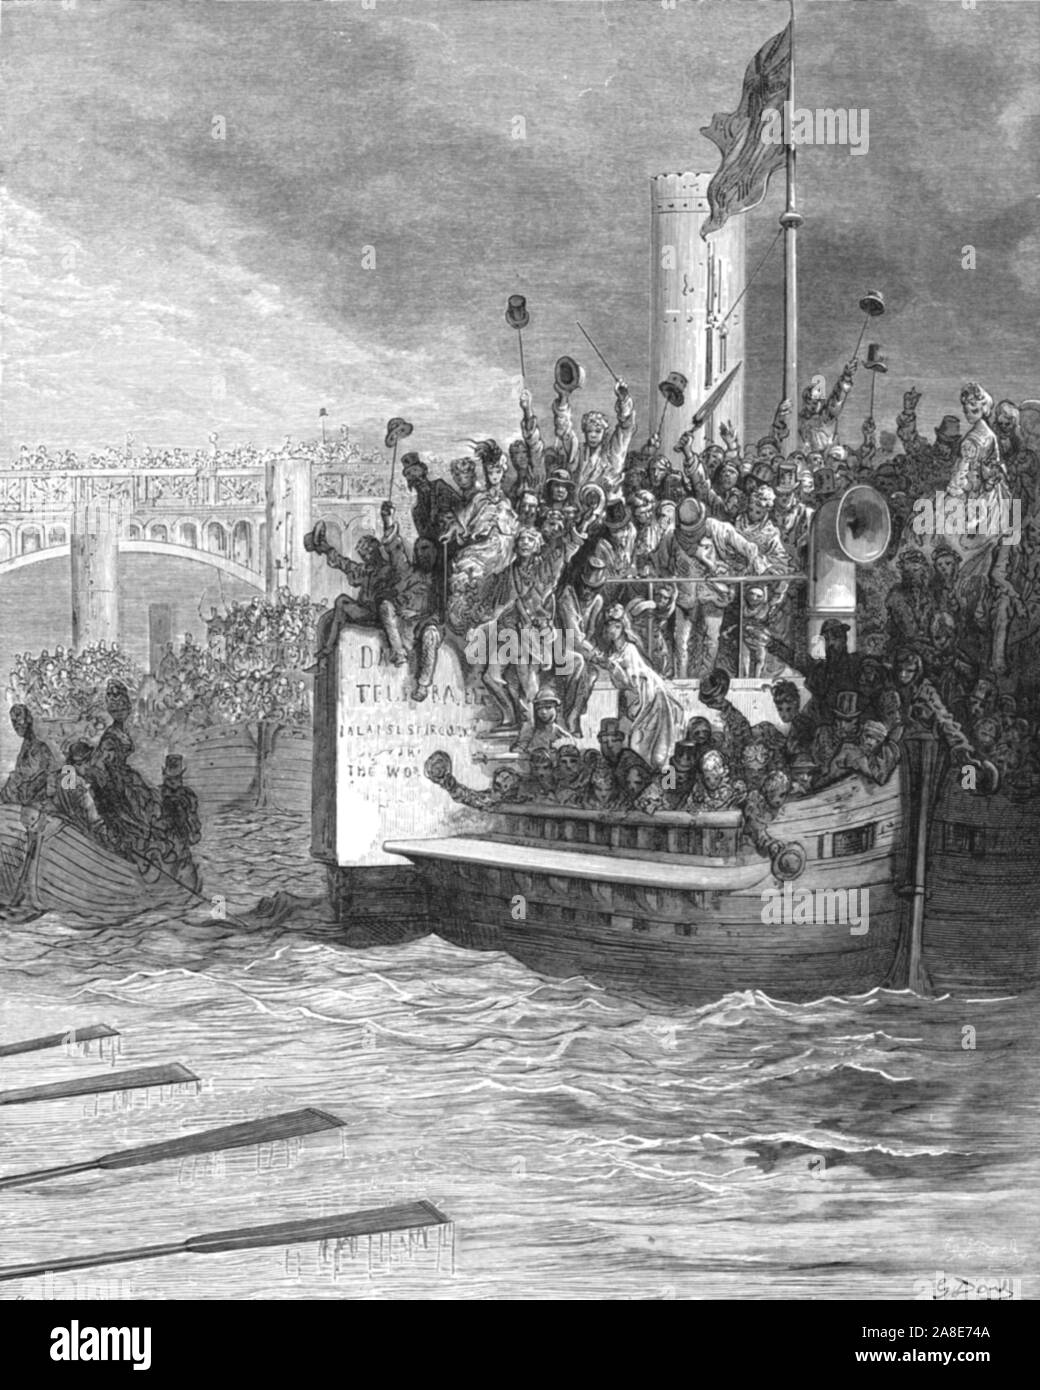 'The Race', 1872. Spectators cheer from boats and bridges during a boat race on the River Thames. From, &quot;LONDON. A Pilgrimage&quot; by Gustave Dore and Blanchard Jerrold. [Grant and Co., 72-78, Turnmill Street, E.C., 1872]. Stock Photo